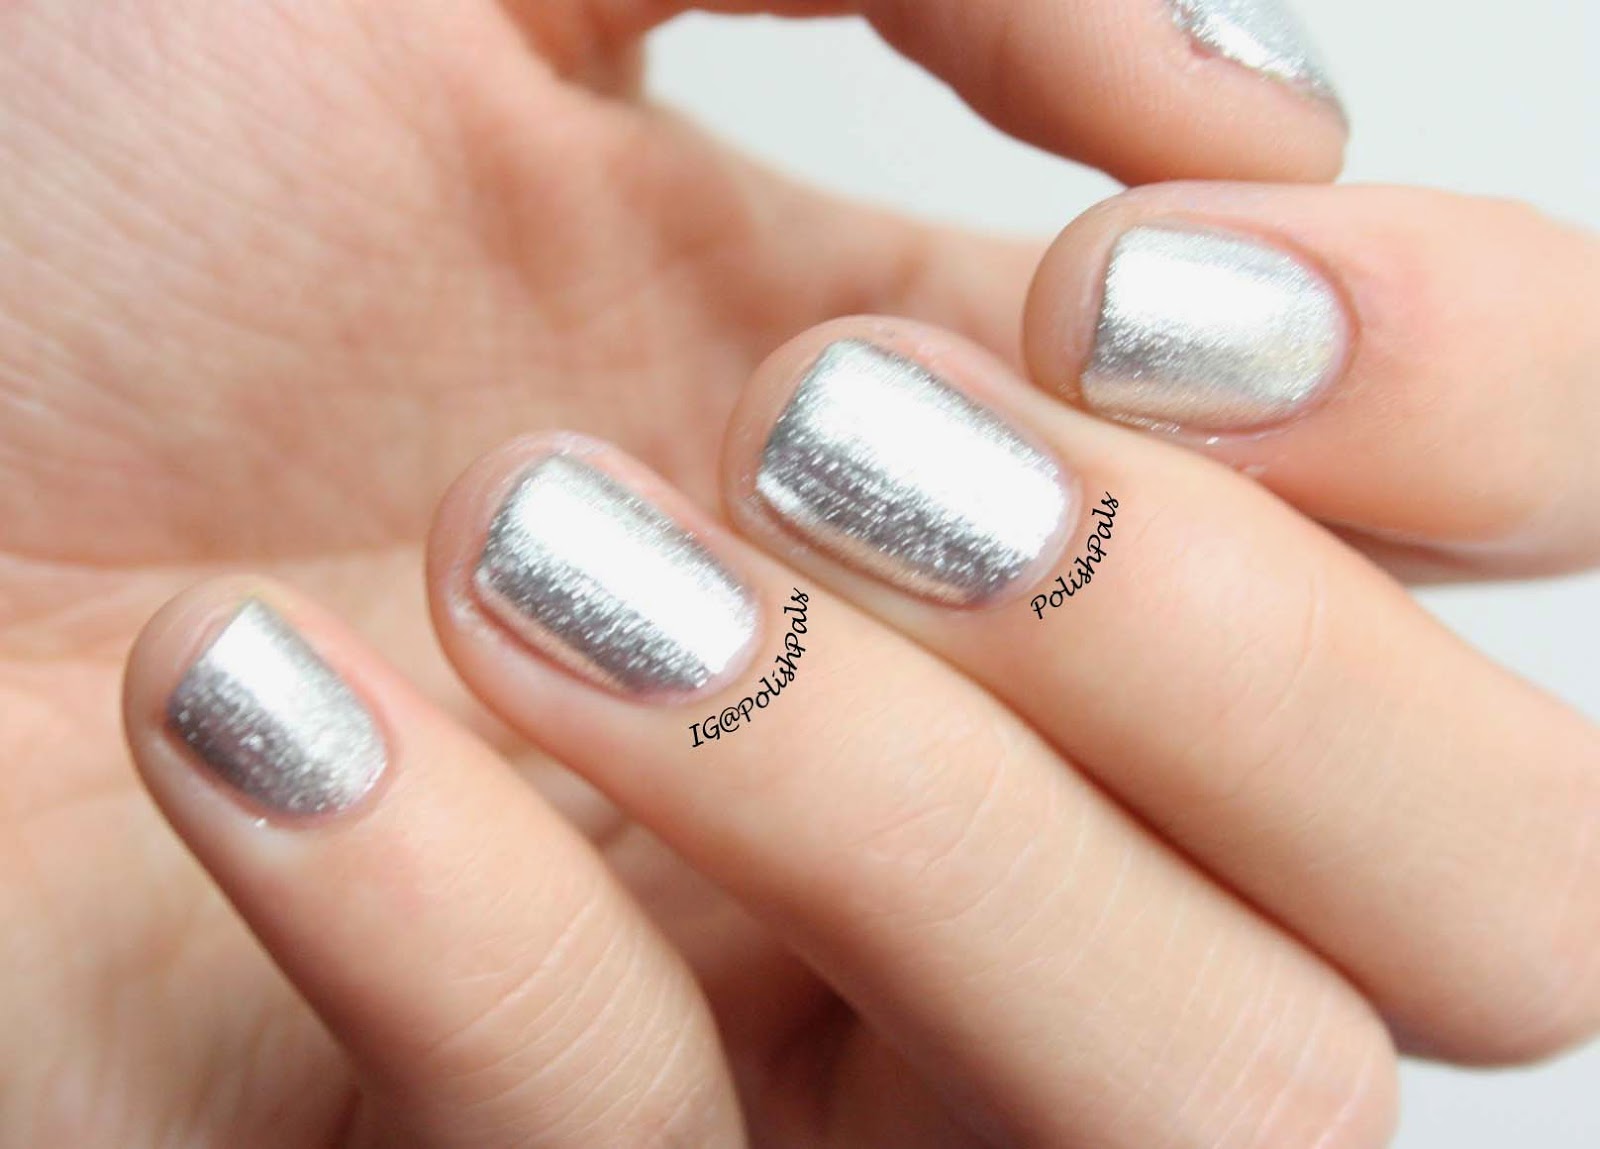 2. Nail Art Designs for Silver Polish - wide 6